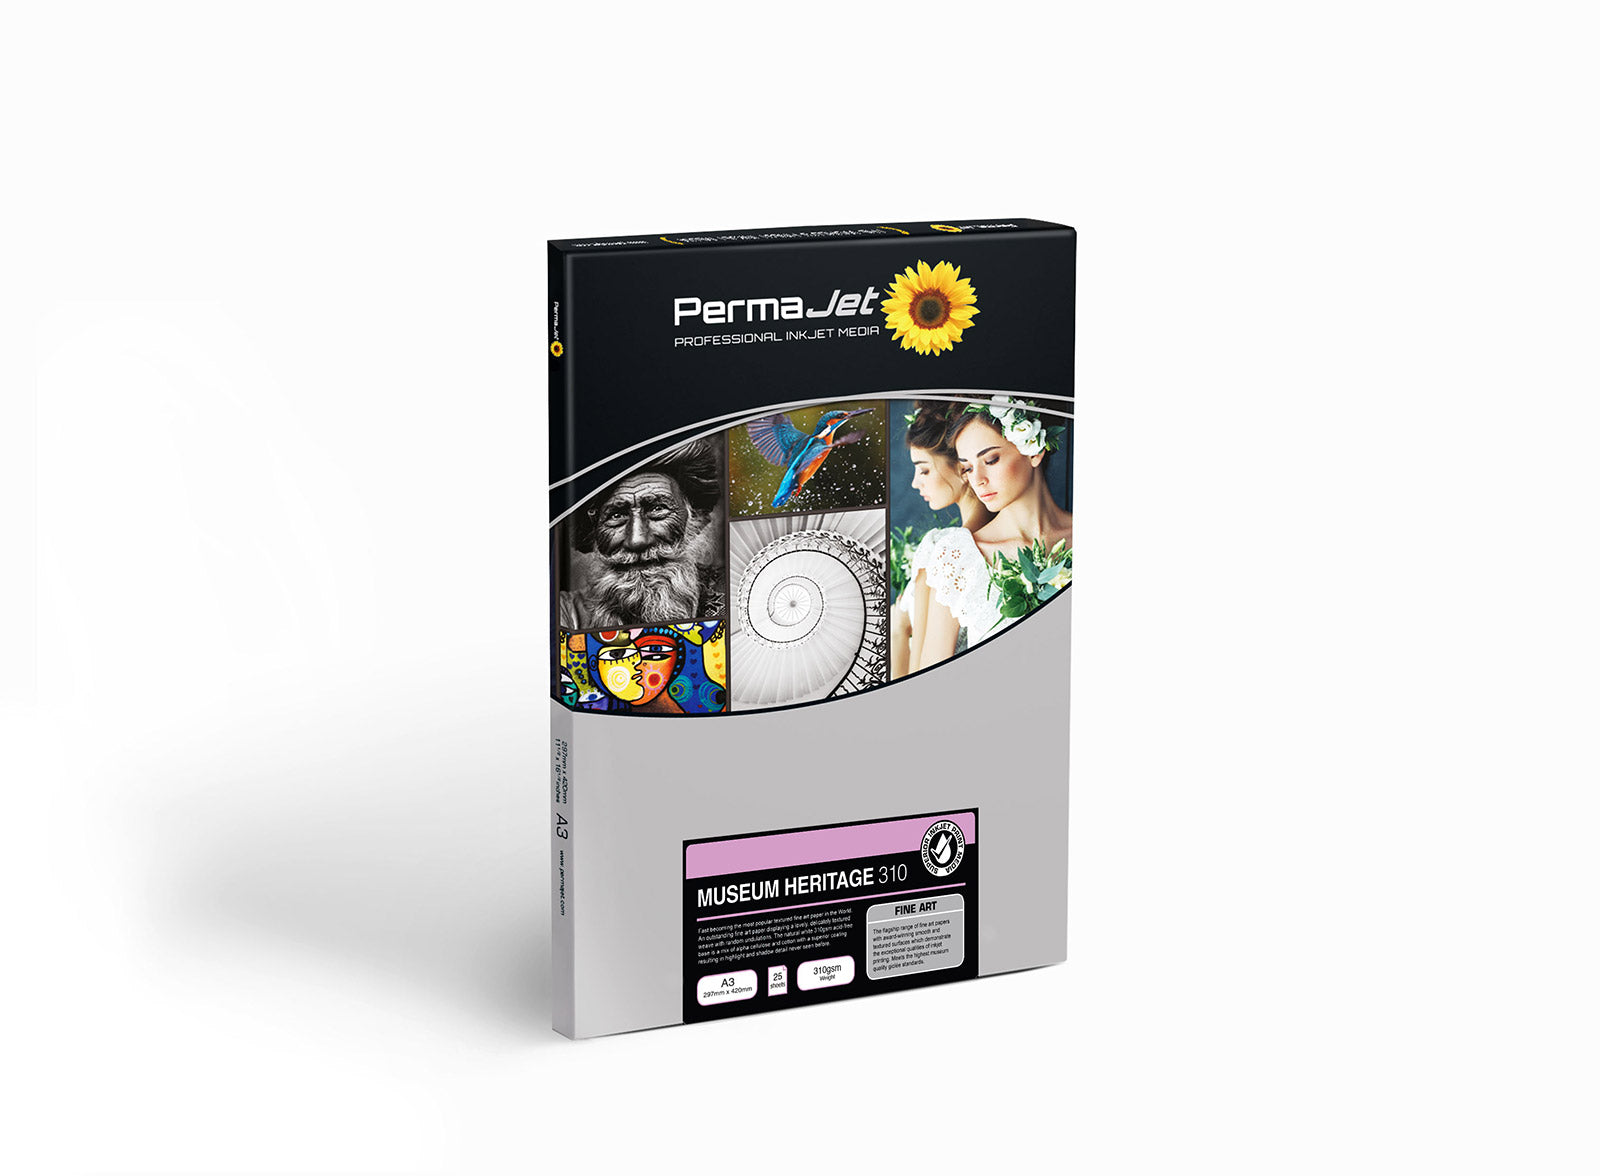 Product Image of PermaJet Museum Heritage 310gsm A3 photo paper - 25 sheets APJ60223